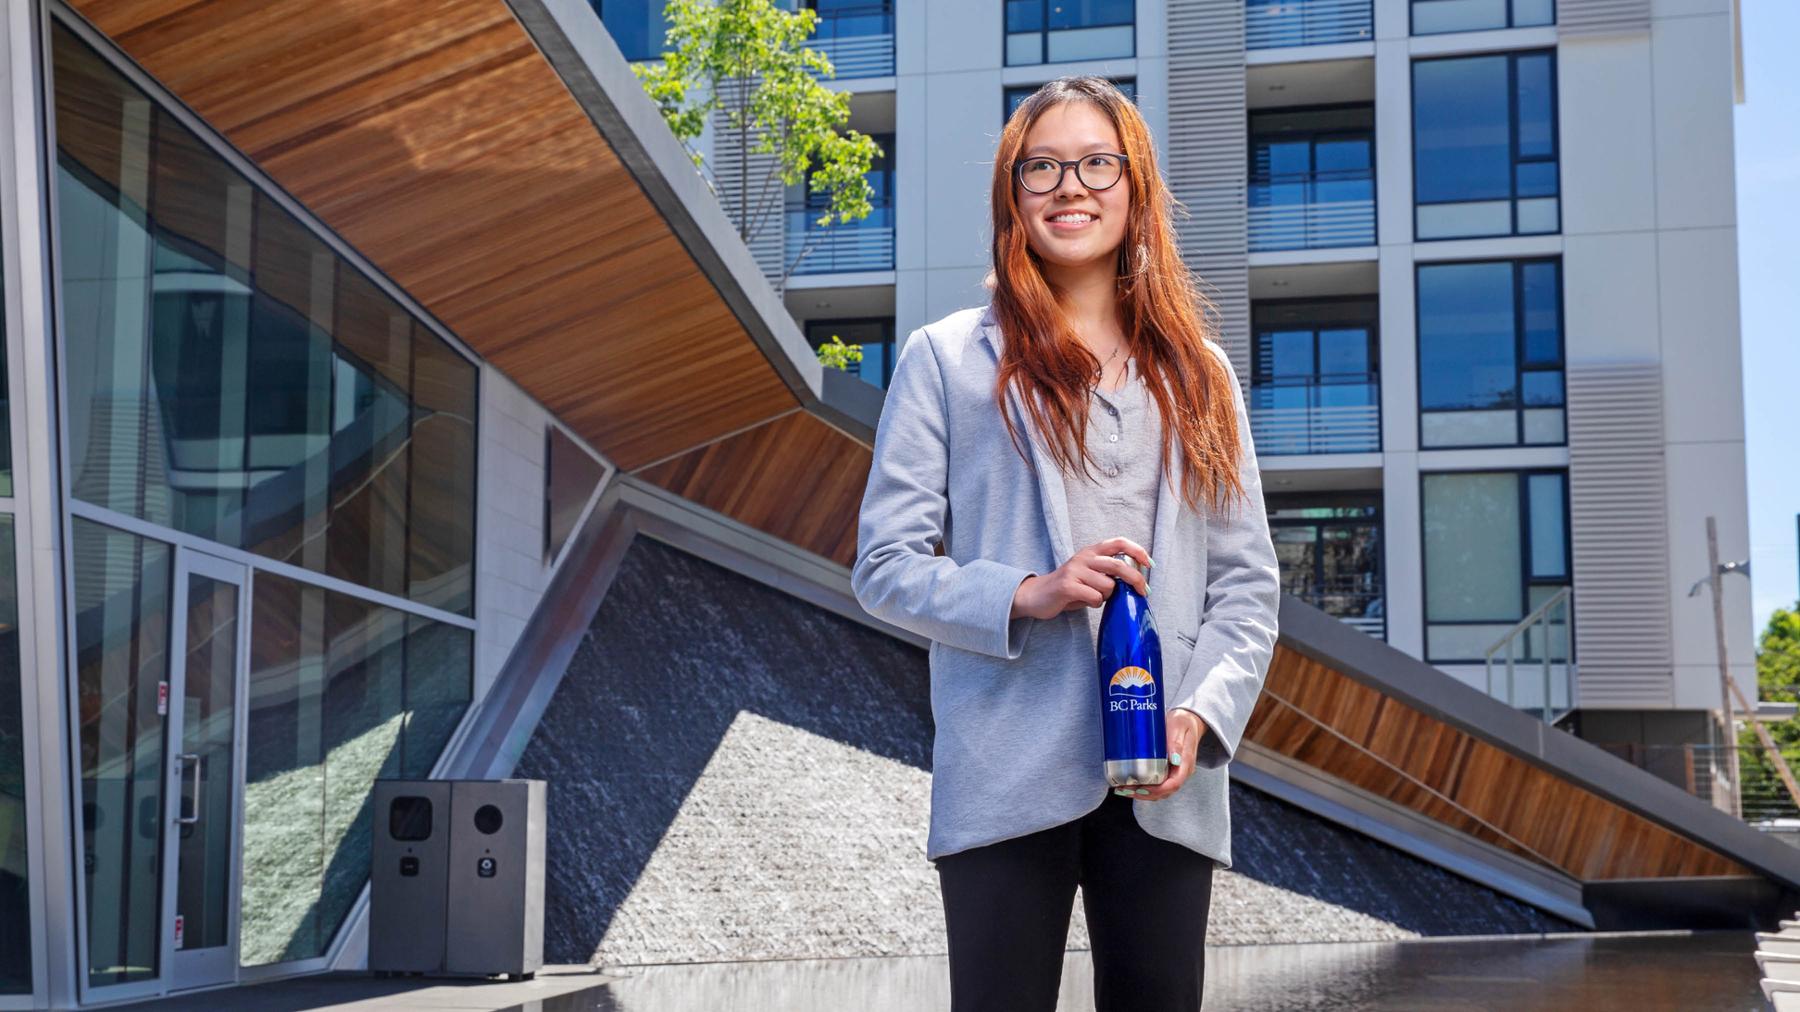 A student is standing on the UVic campus, holding a BC Parks branded water bottle. She is smiling at the camera.